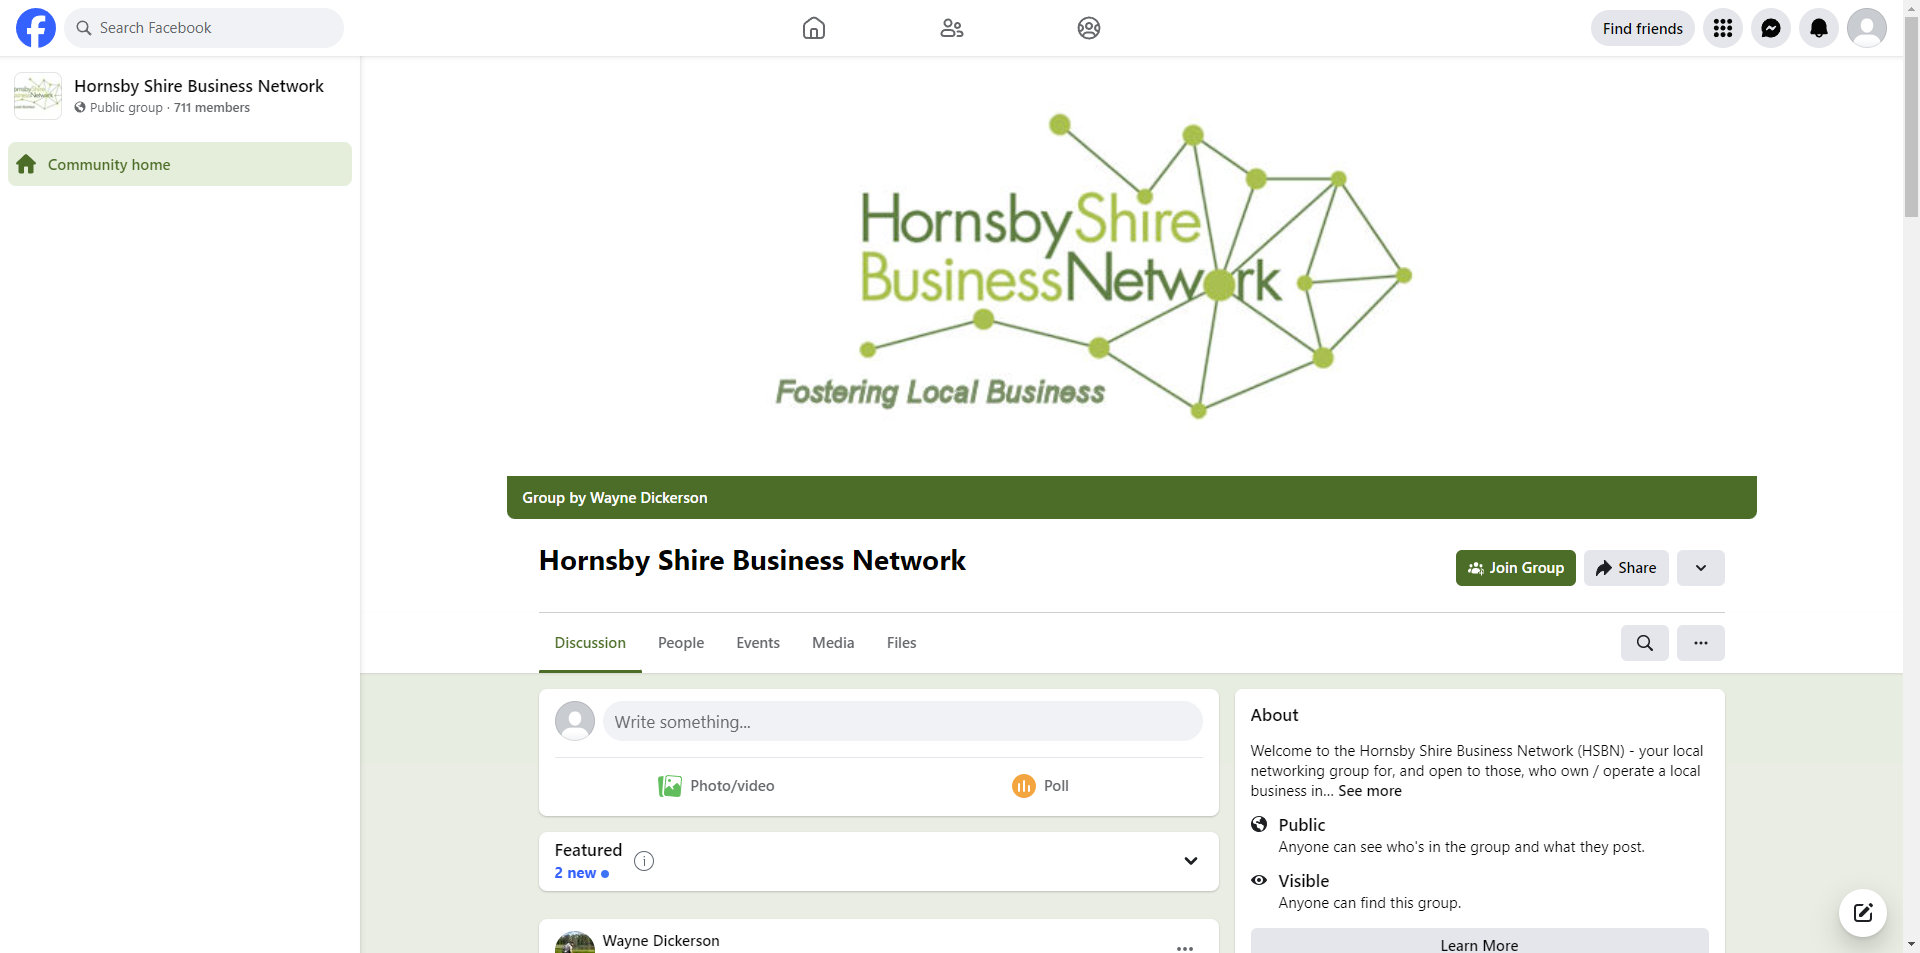 Hornsby Shire Business Network